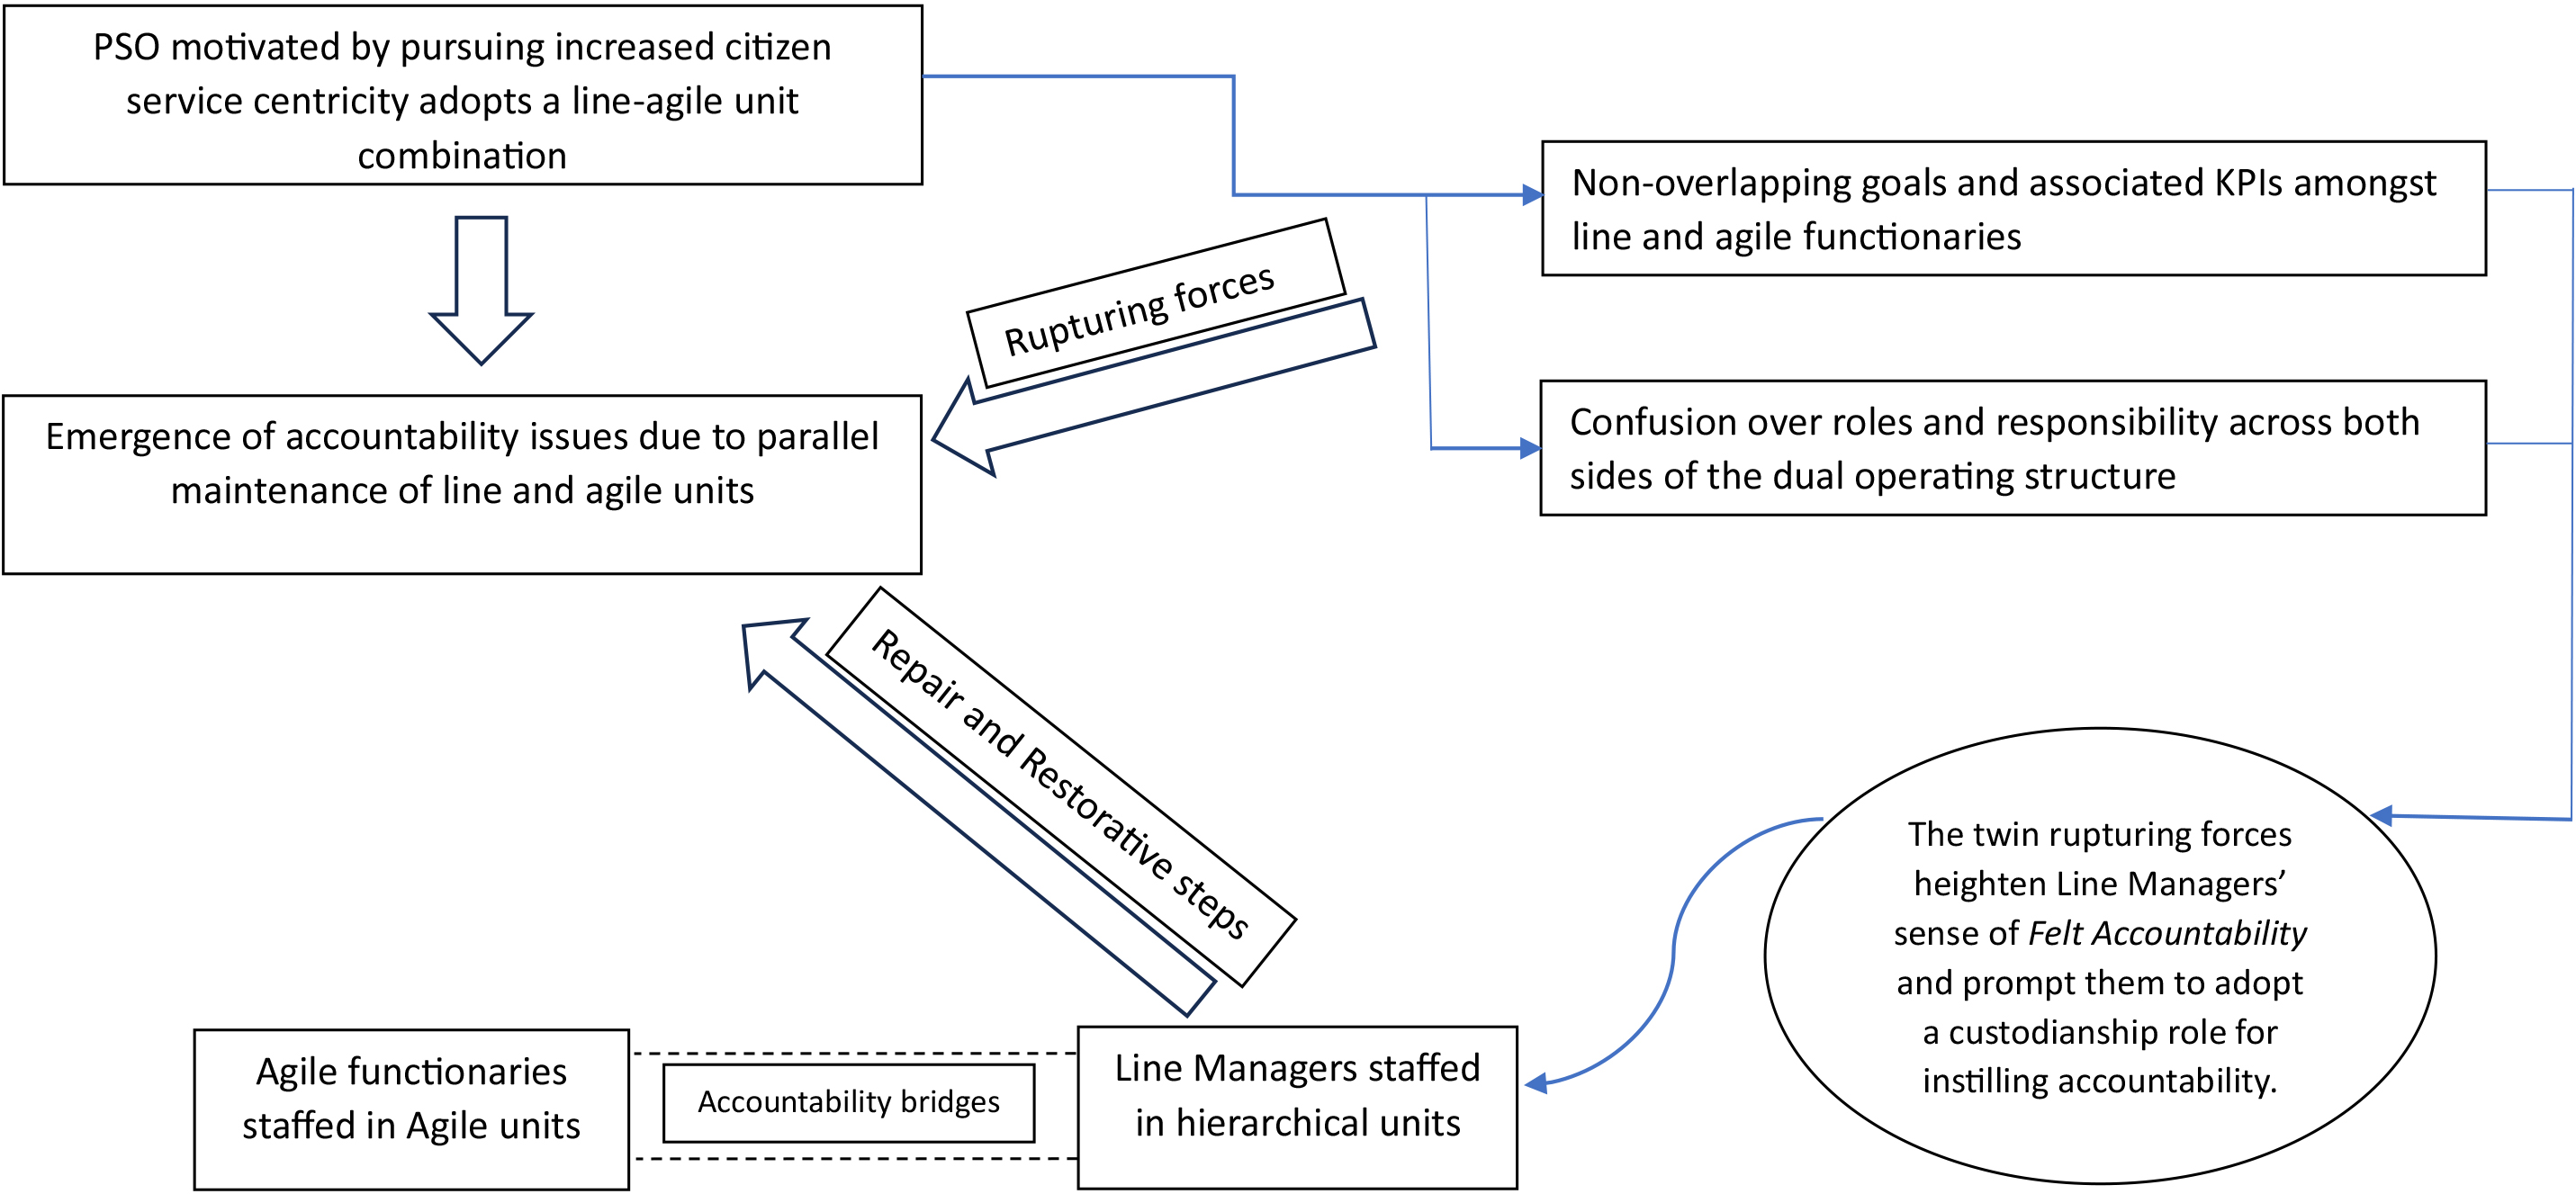 Felt accountability amongst line managers prompting them to metamorphize as accountability custodians and instillers in line-agile combinations in public service organizations.